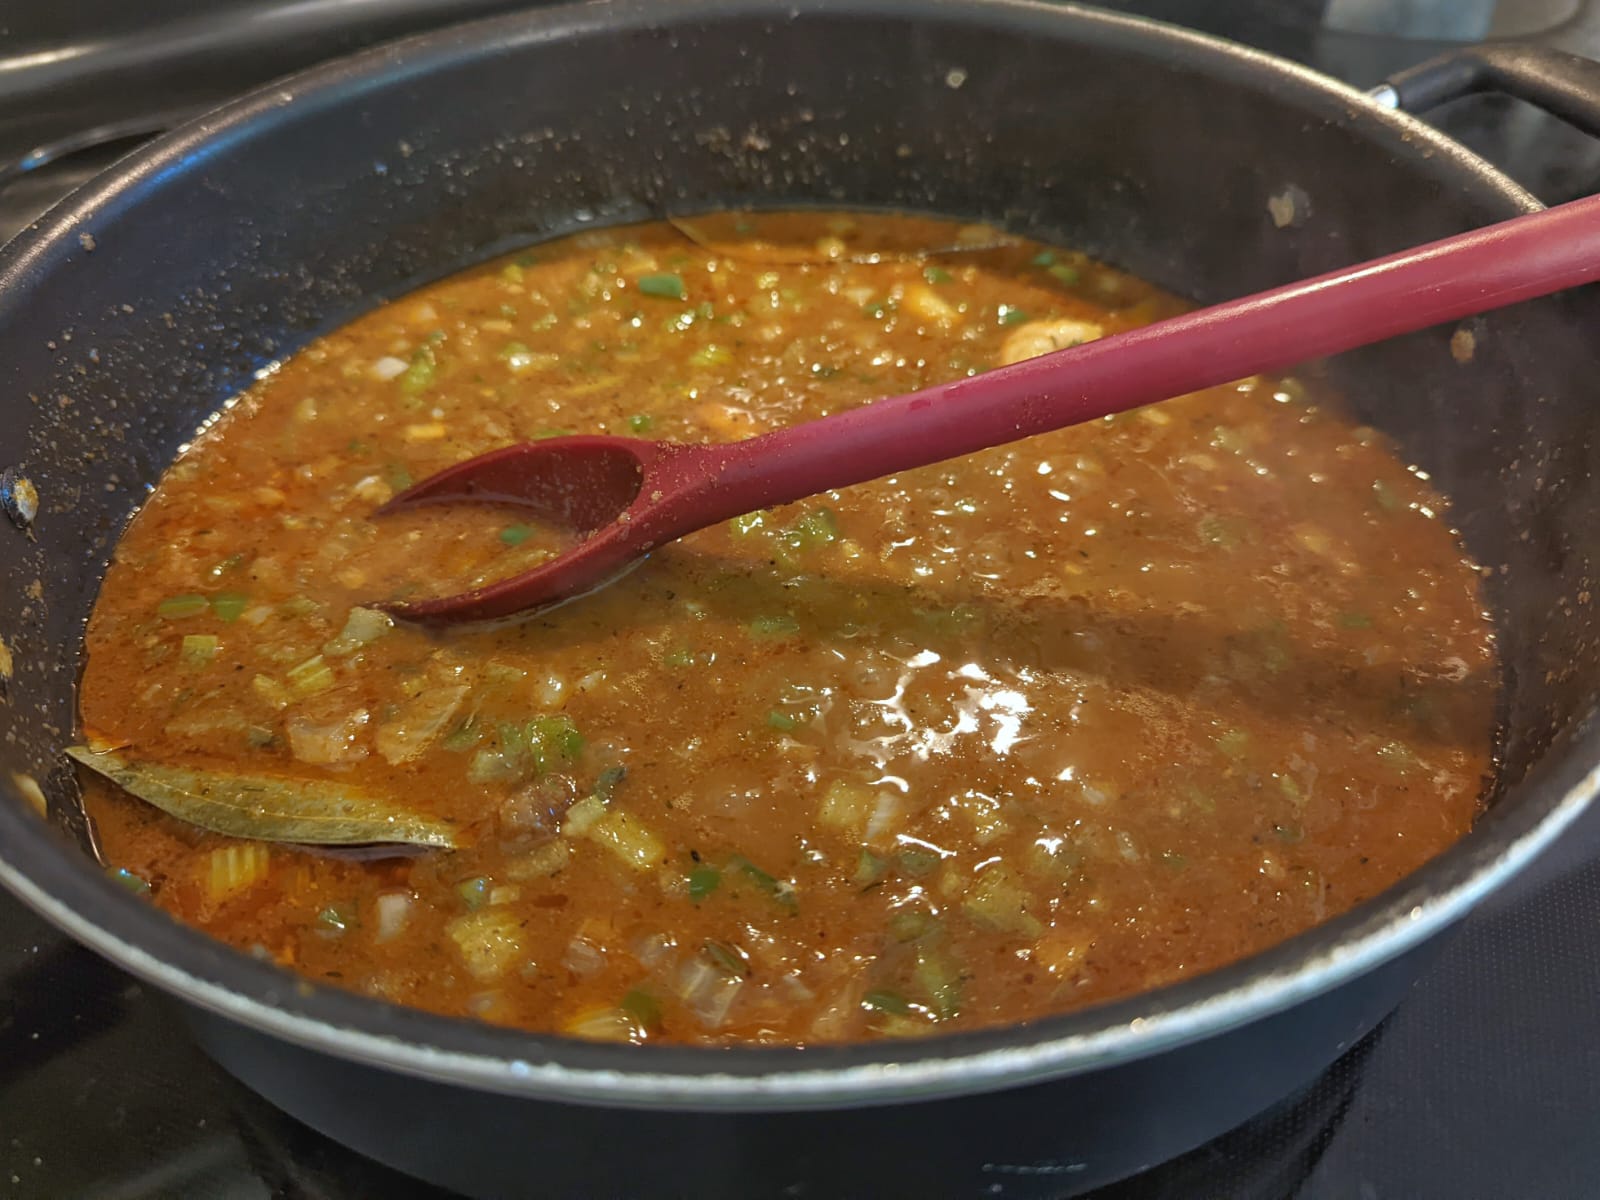 Etouffee sauce simmering in a pan.